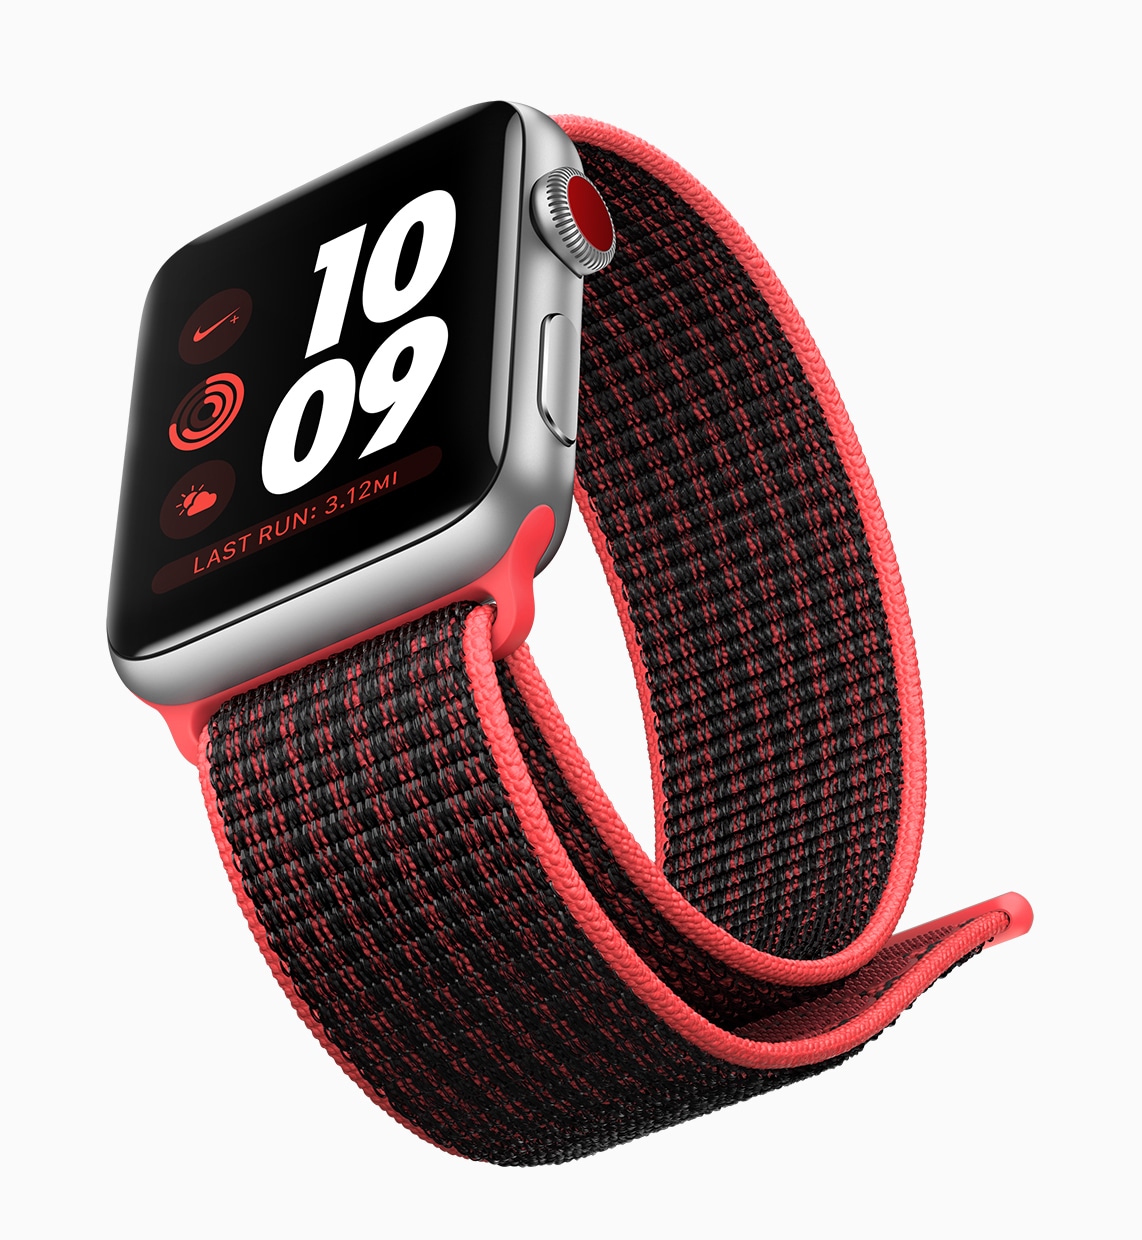 Apple Watch Series 3 with red sports band